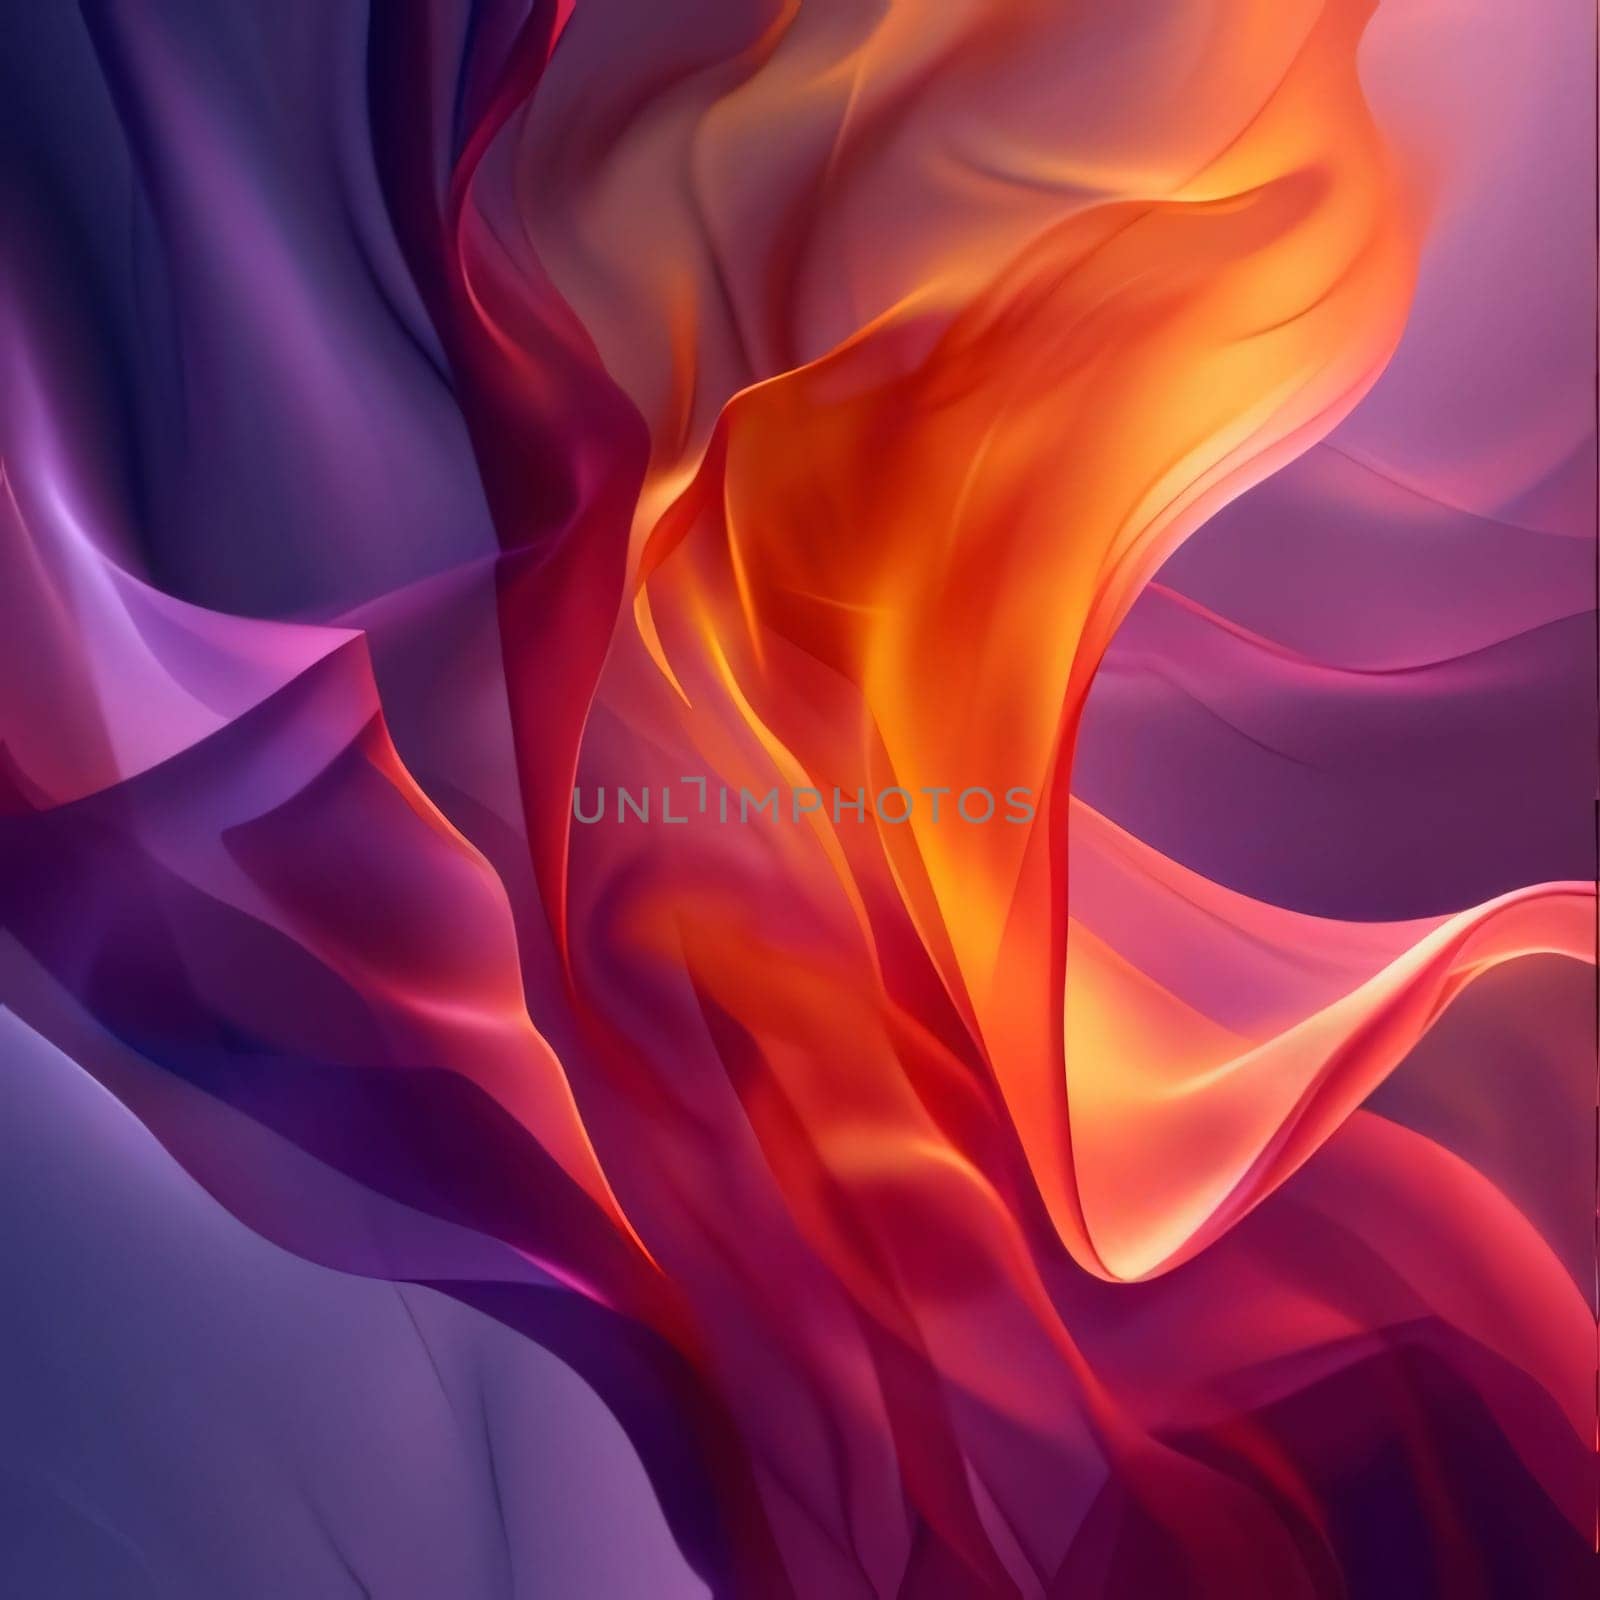 Abstract background design: abstract wavy background with smooth lines in red and orange colors